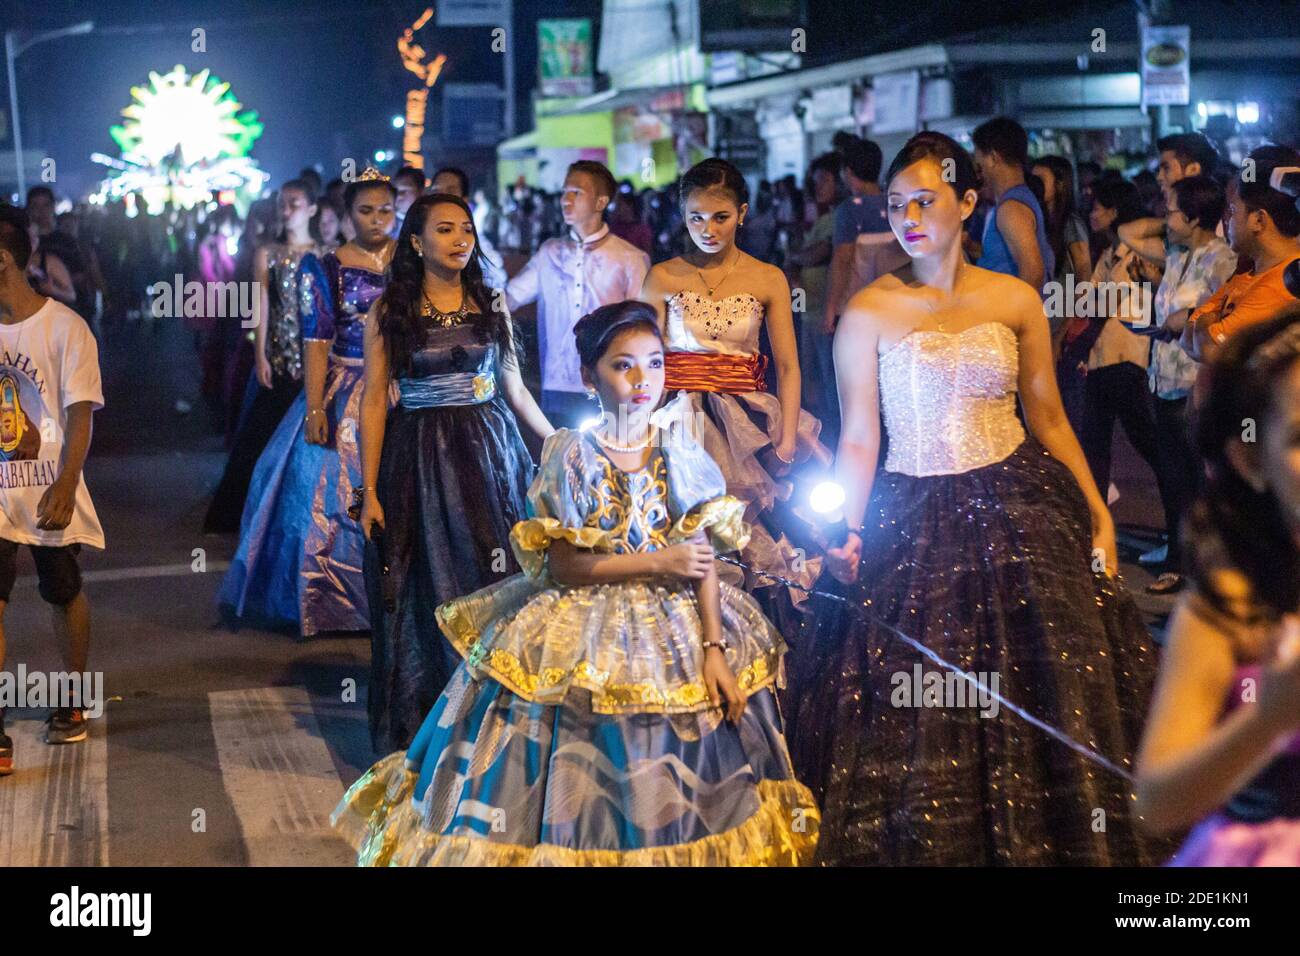 Festival pageantry dressed in elaborate gowns during the May Flower Tapusan Festival in Alitagtag, Batangas, Philippines Stock Photo